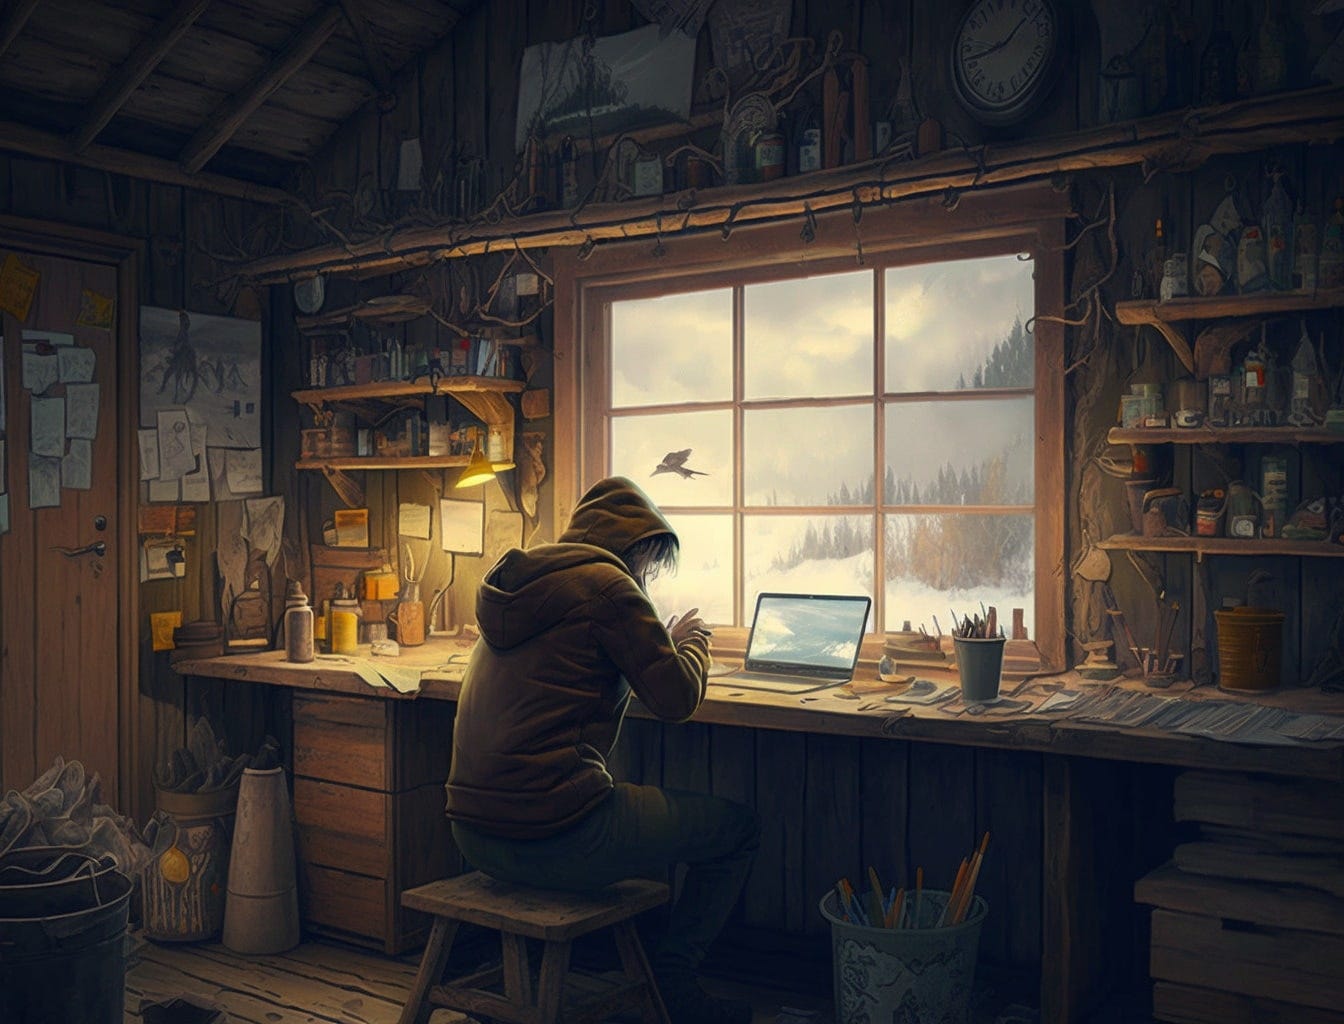 A person sits in a hoody typing on a laptop on a desk, the view is from behind them and the wooden shed-like walls are filled with trinkets, books and oddities picked up over the years